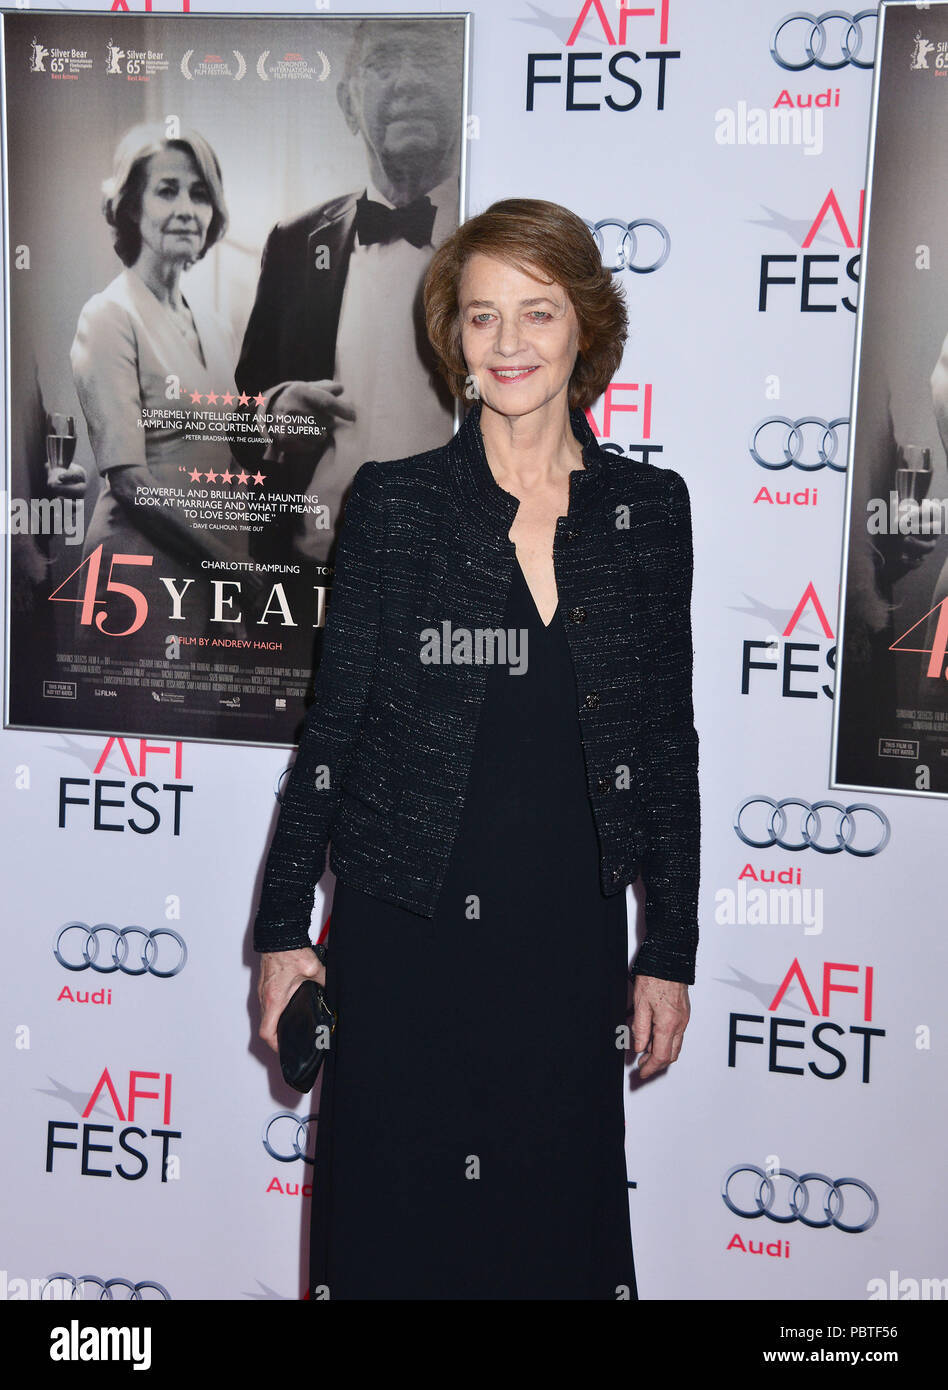 Charlotte Rambling 012 at the Tribute to Charlotte Rampling and Tom Courtenay at the AFI Film Festival, 45 years ,  at the TCL Chinese Theatre in Los Angeles. November 11, 2015.Charlotte Rambling 012 ------------- Red Carpet Event, Vertical, USA, Film Industry, Celebrities,  Photography, Bestof, Arts Culture and Entertainment, Topix Celebrities fashion /  Vertical, Best of, Event in Hollywood Life - California,  Red Carpet and backstage, USA, Film Industry, Celebrities,  movie celebrities, TV celebrities, Music celebrities, Photography, Bestof, Arts Culture and Entertainment,  Topix, Three Qua Stock Photo